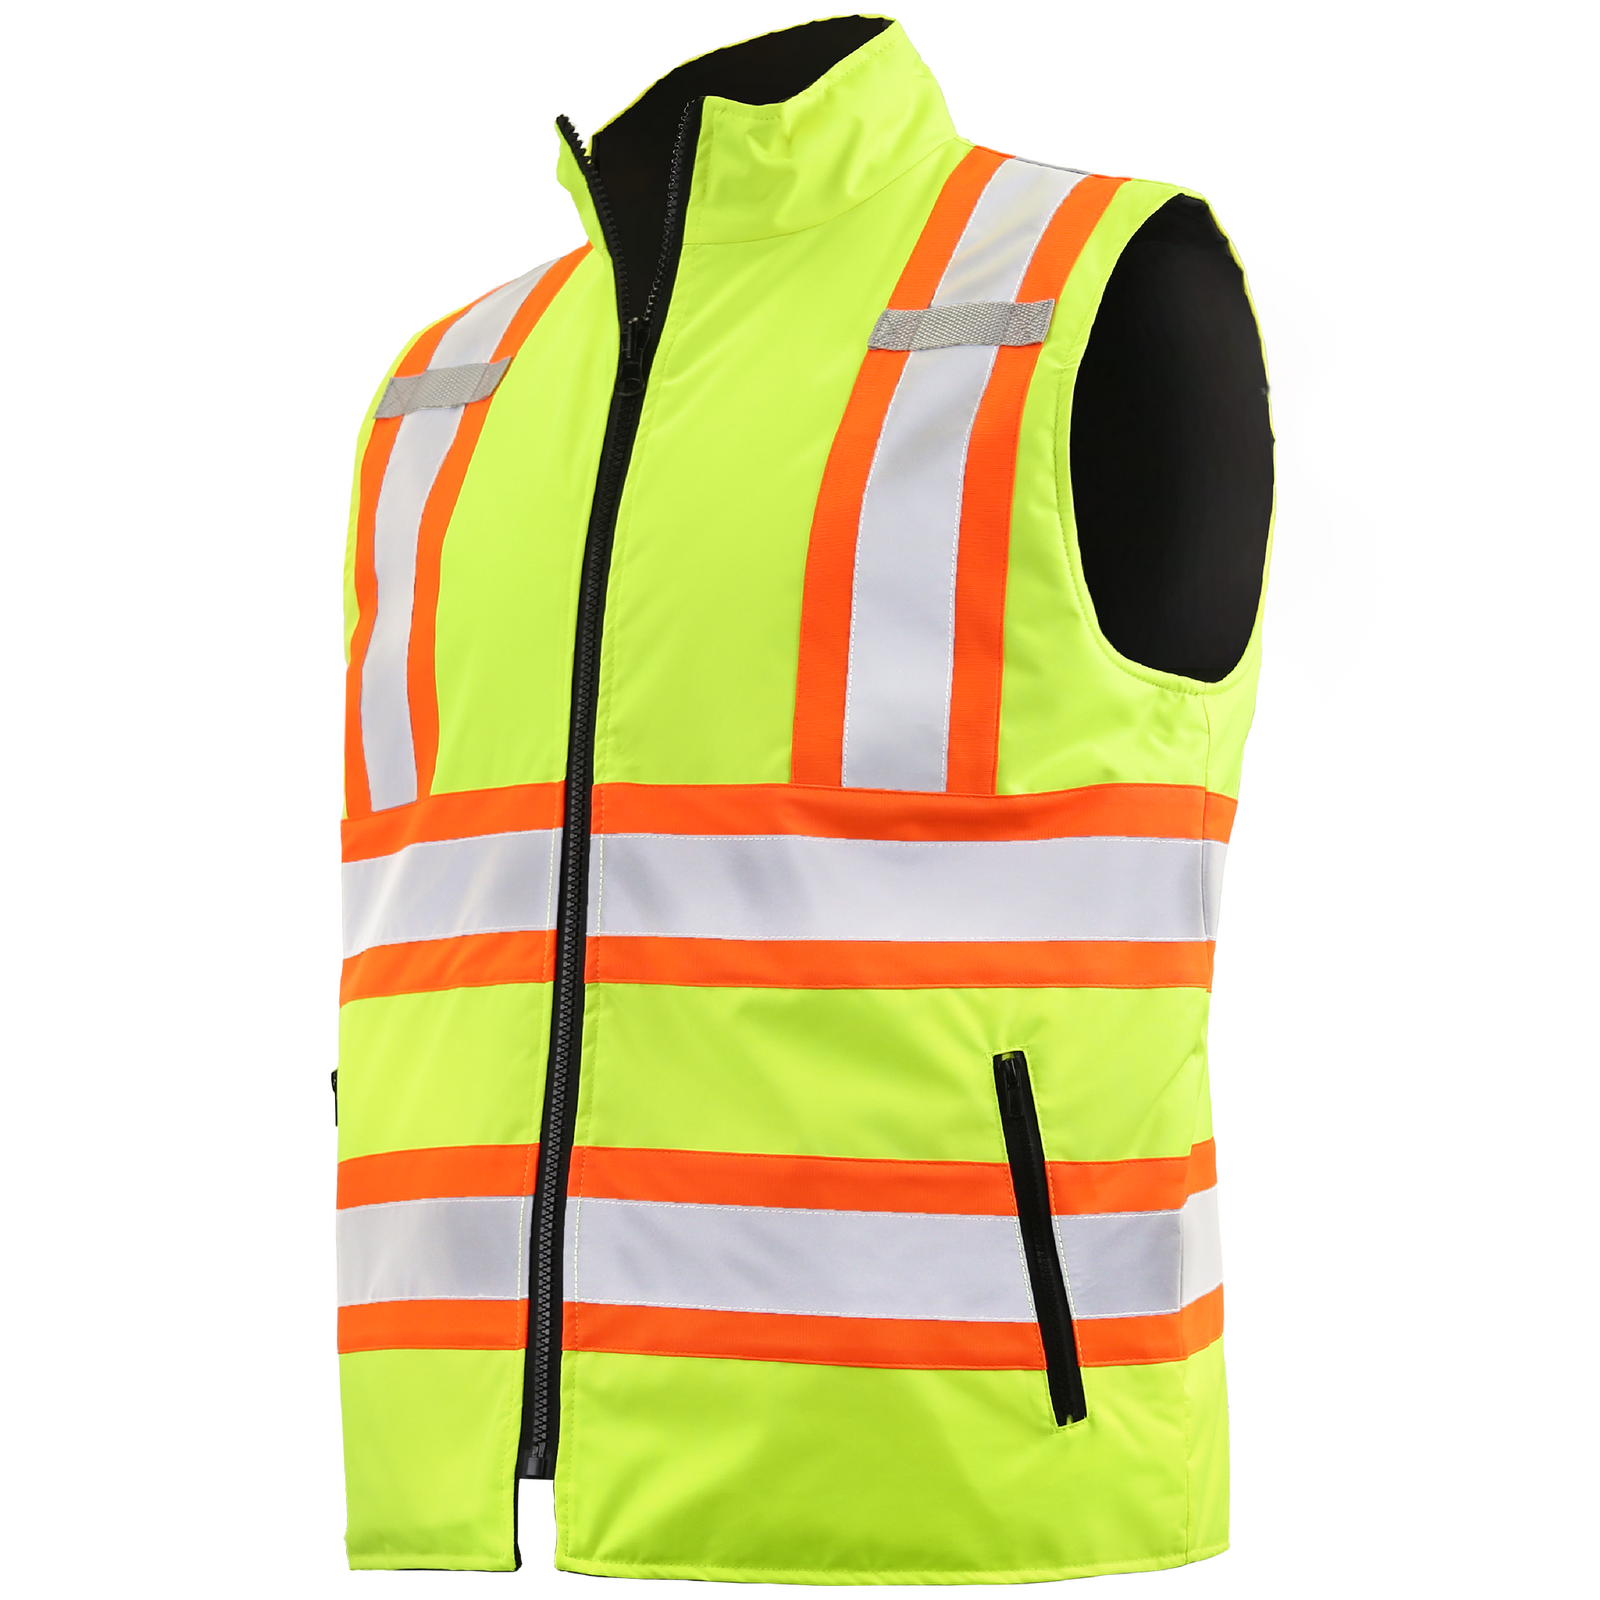 Showing the two toned high visibility side and the black side of the JORESTECH reversible insulated safety vest with zipper